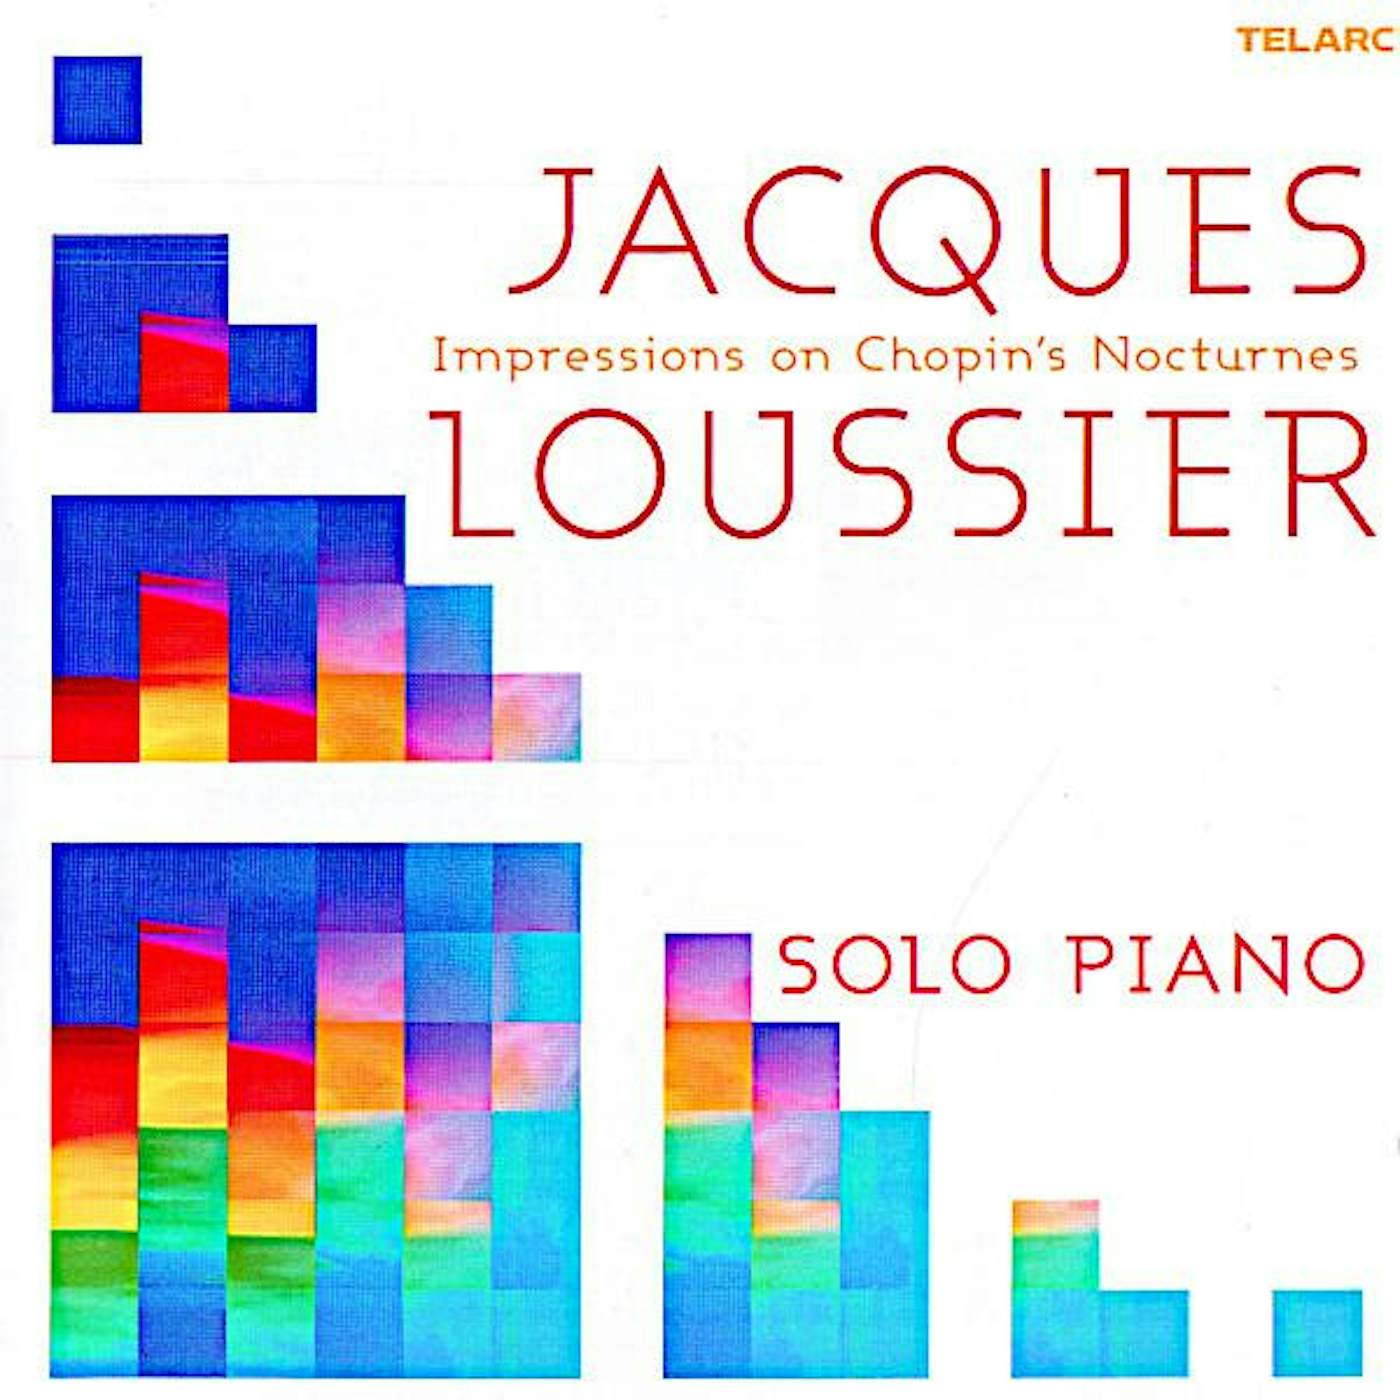 Jacques Loussier IMPRESSIONS ON CHOPIN'S NOCTURNES CD